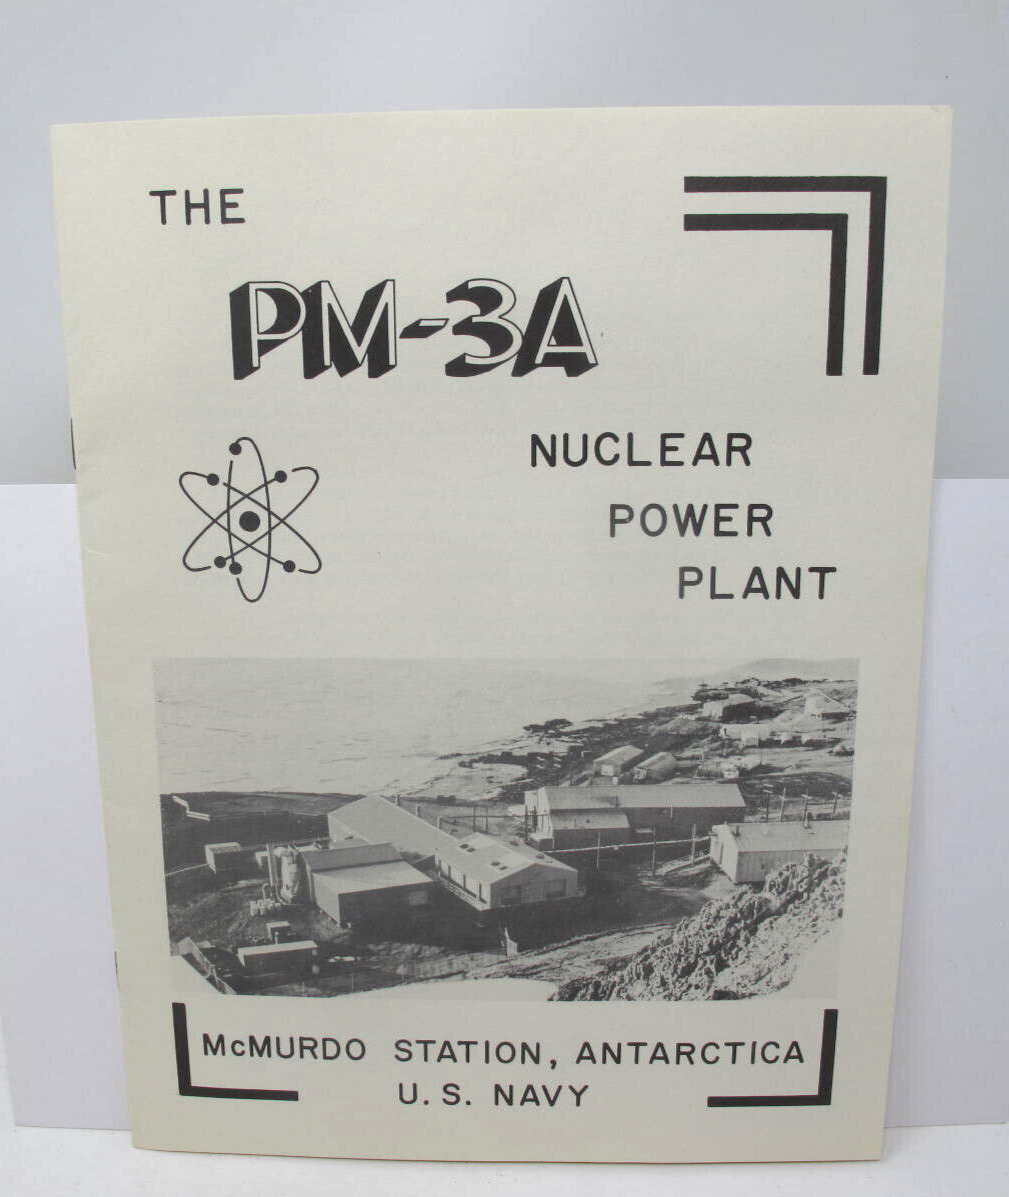 PM-3A NUCLEAR POWER PLANT McMURDO ANTARCTIC NAVY Nukey Poo DEEP FREEZE Booklet